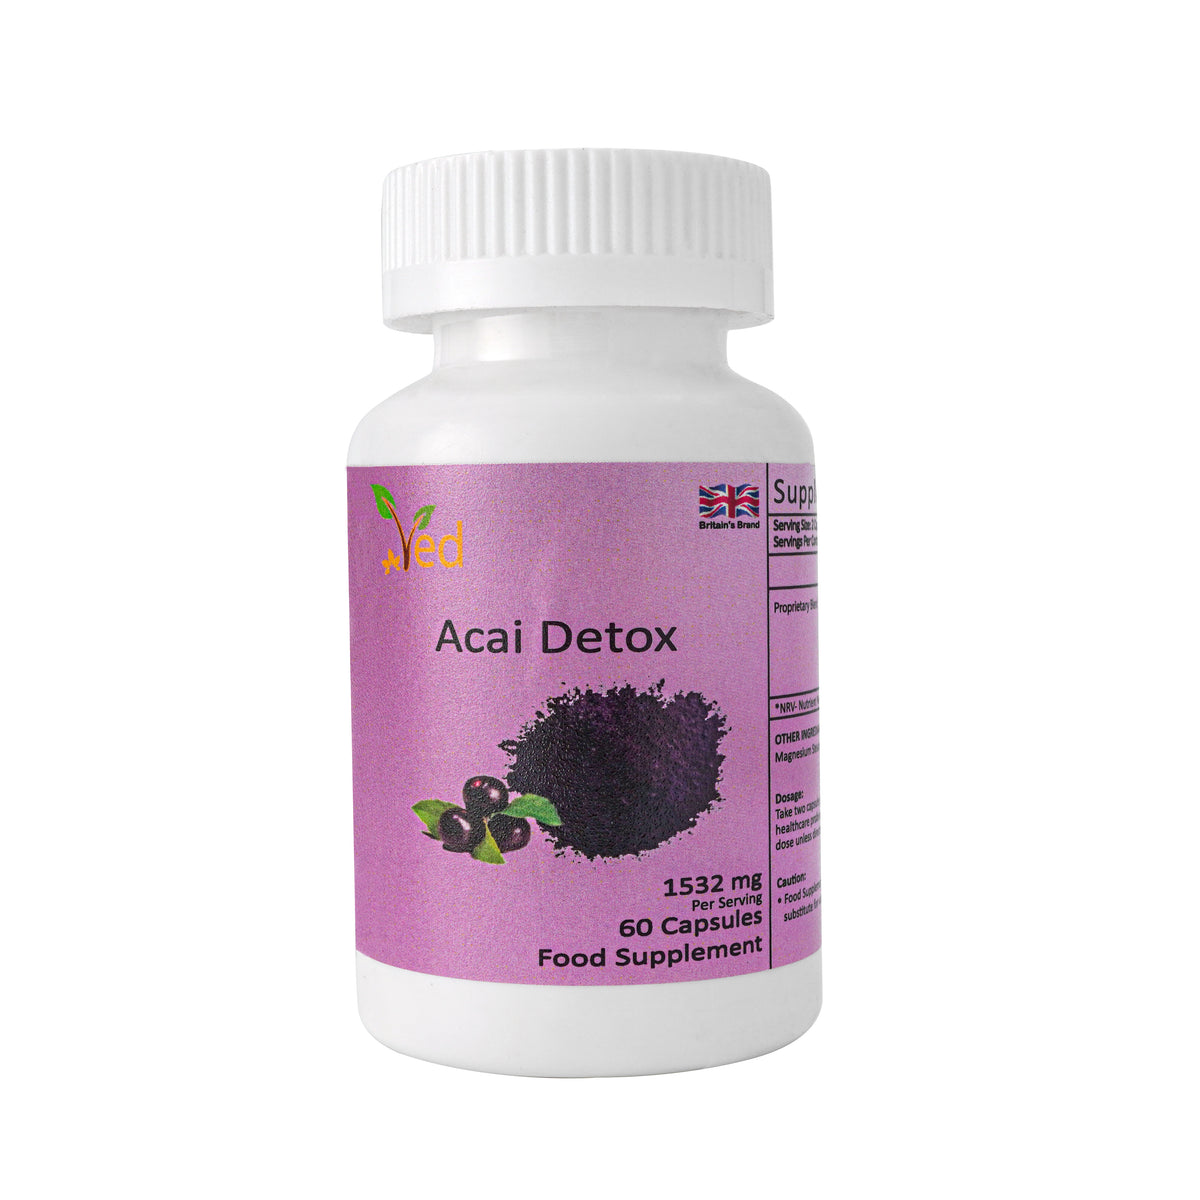 Ved Acai, Detox Management Capsule, 1532 mg Proprietary Blend per Serving, 60 Capsule (30 Day Supply)